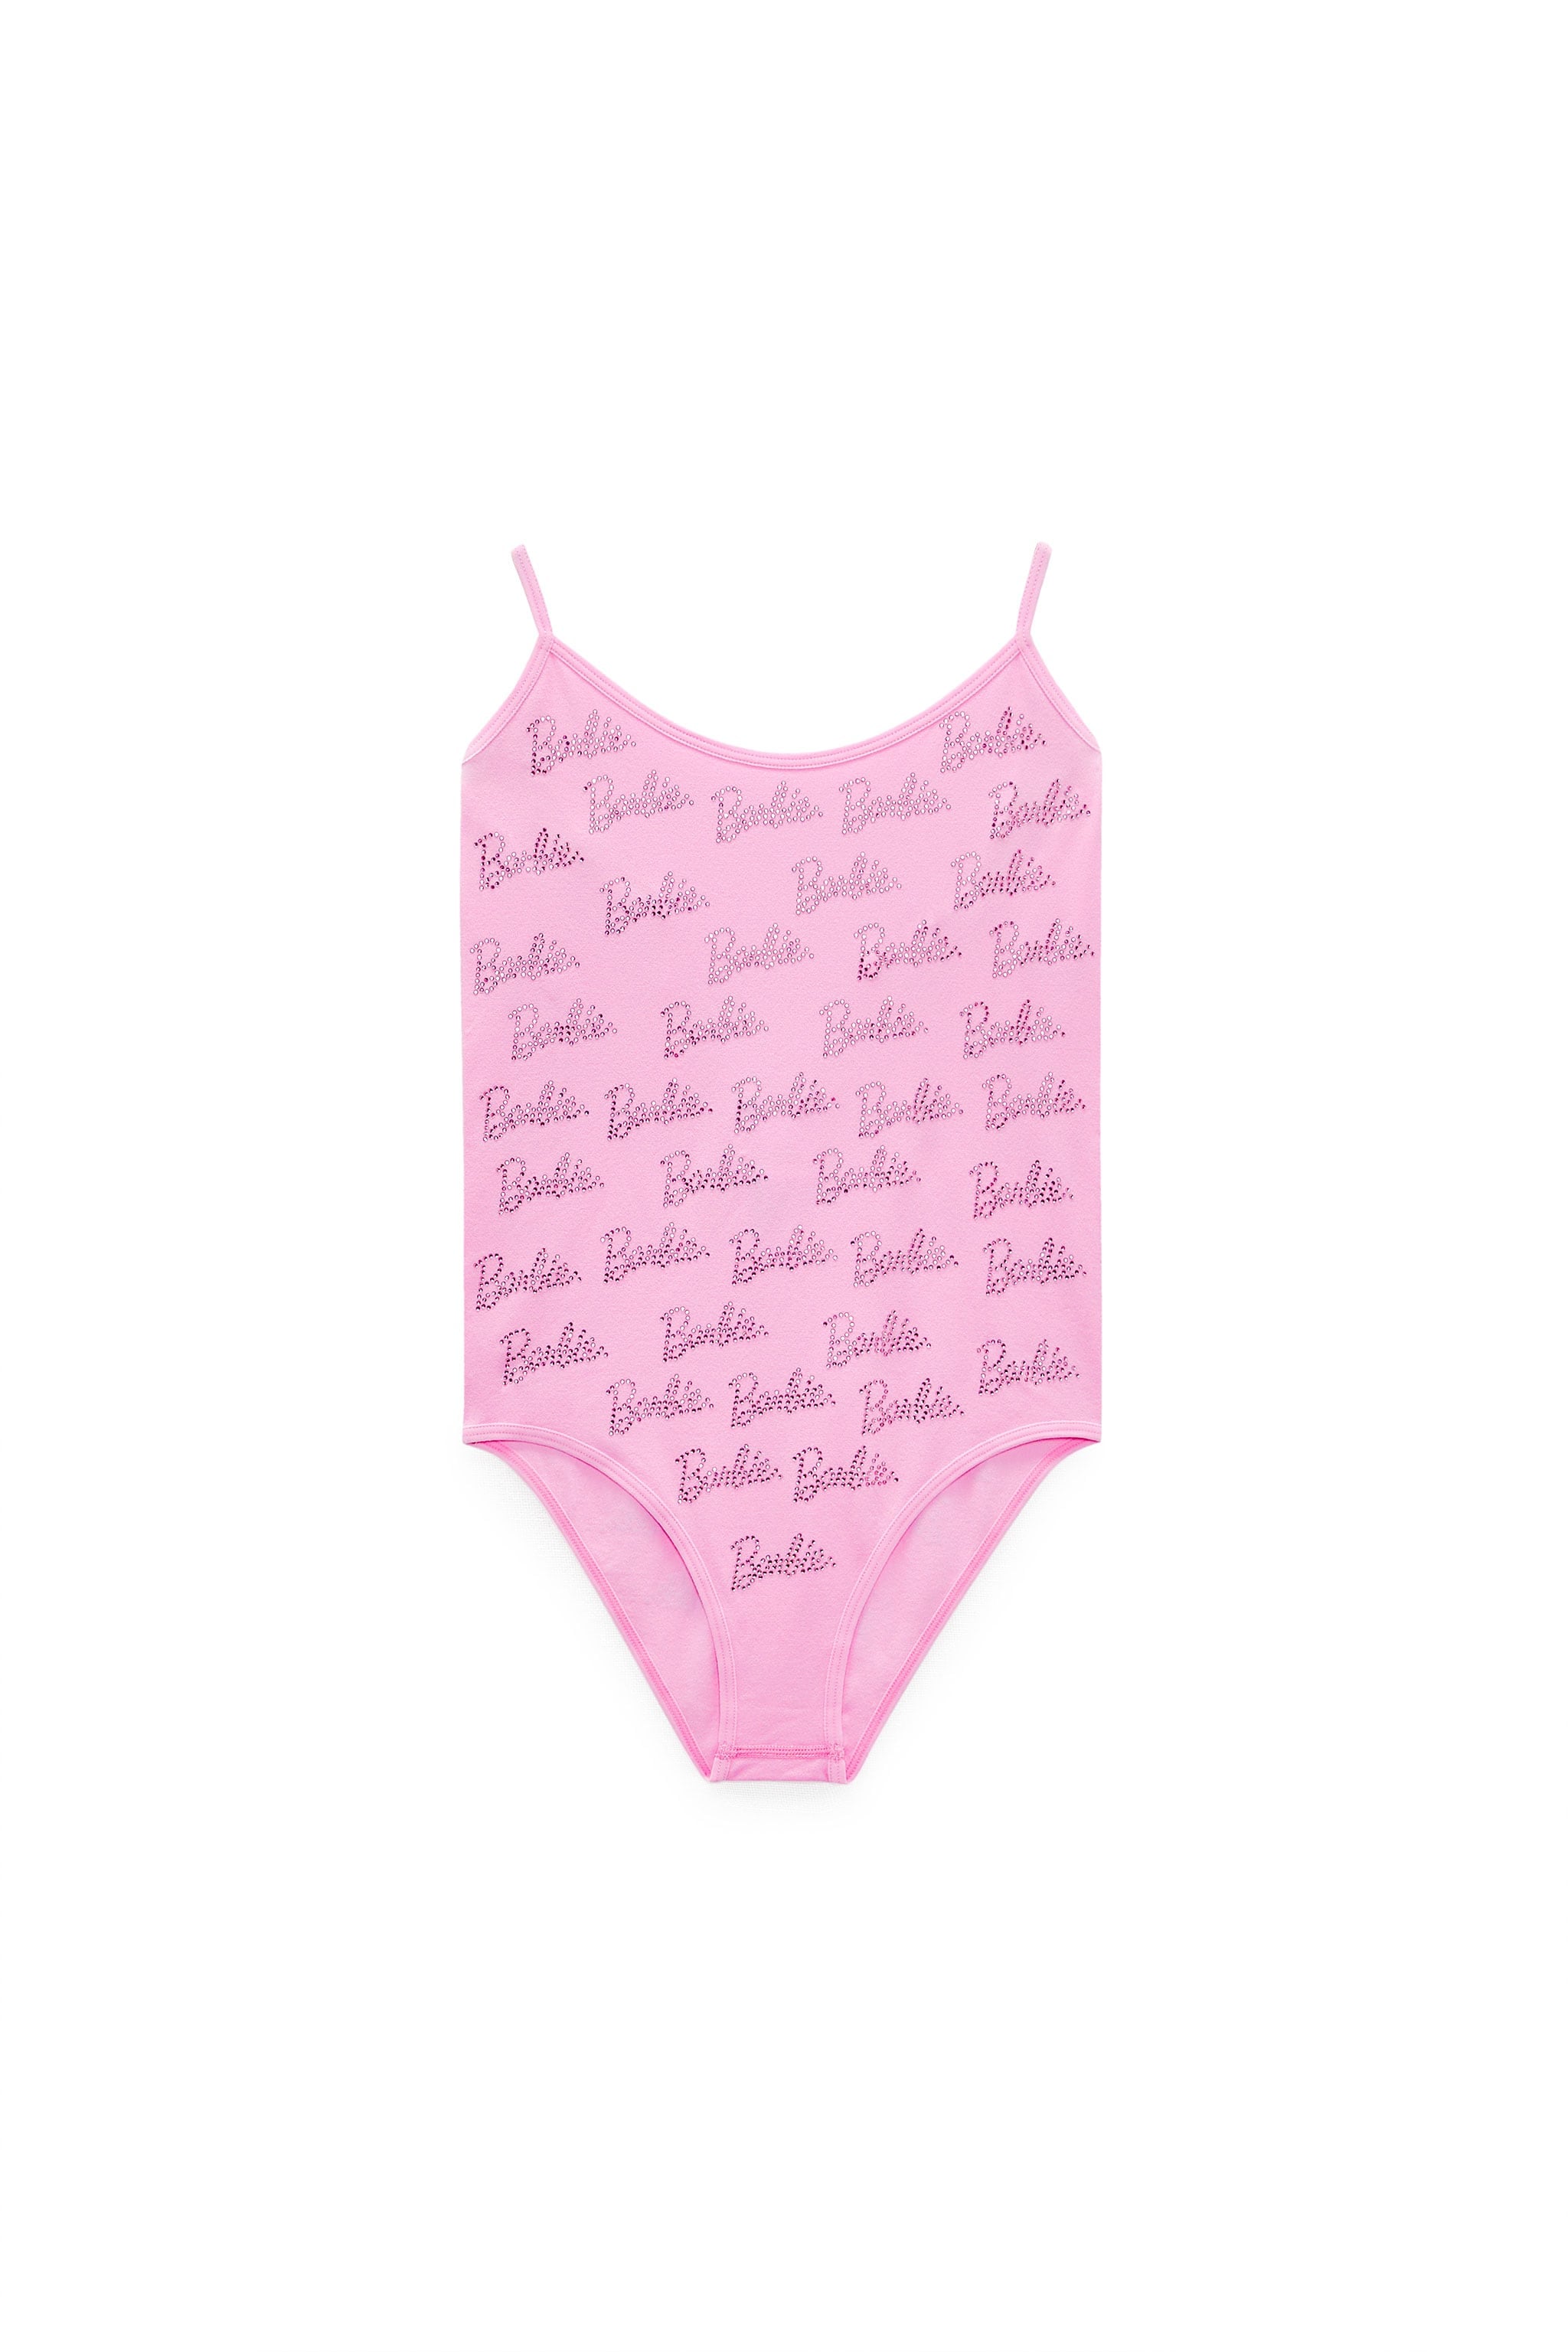 Barbie Merch Bodysuit, If You Can't Get Kenough of the Barbie Movie,  Here's Where to Buy All the Merch